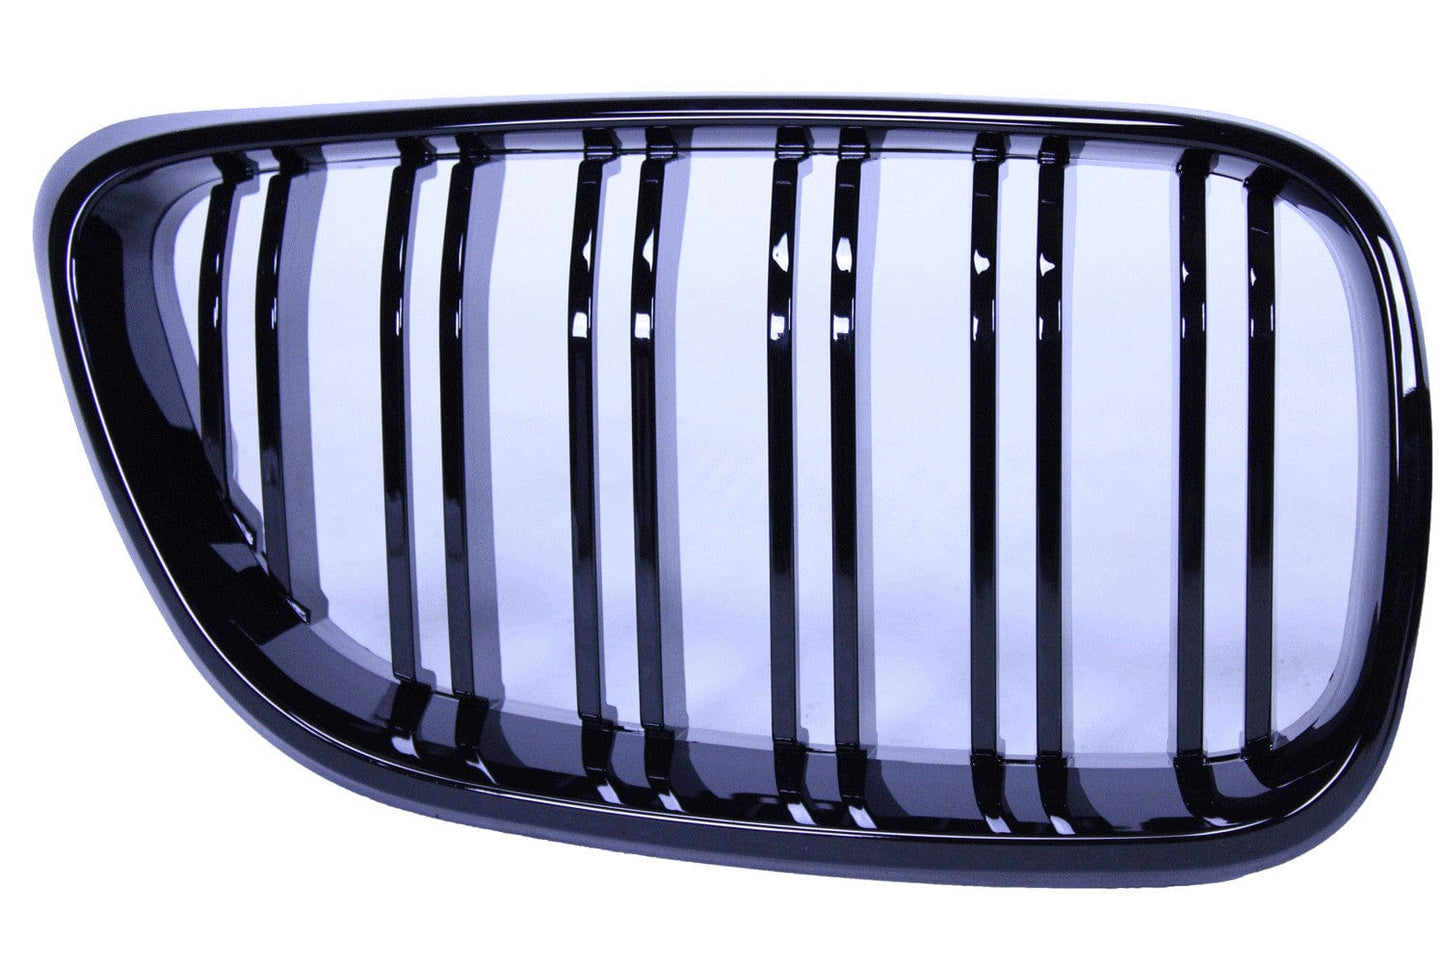 Grill kidneys compatible with BMW 2 series F22 - F23 gloss black double bars